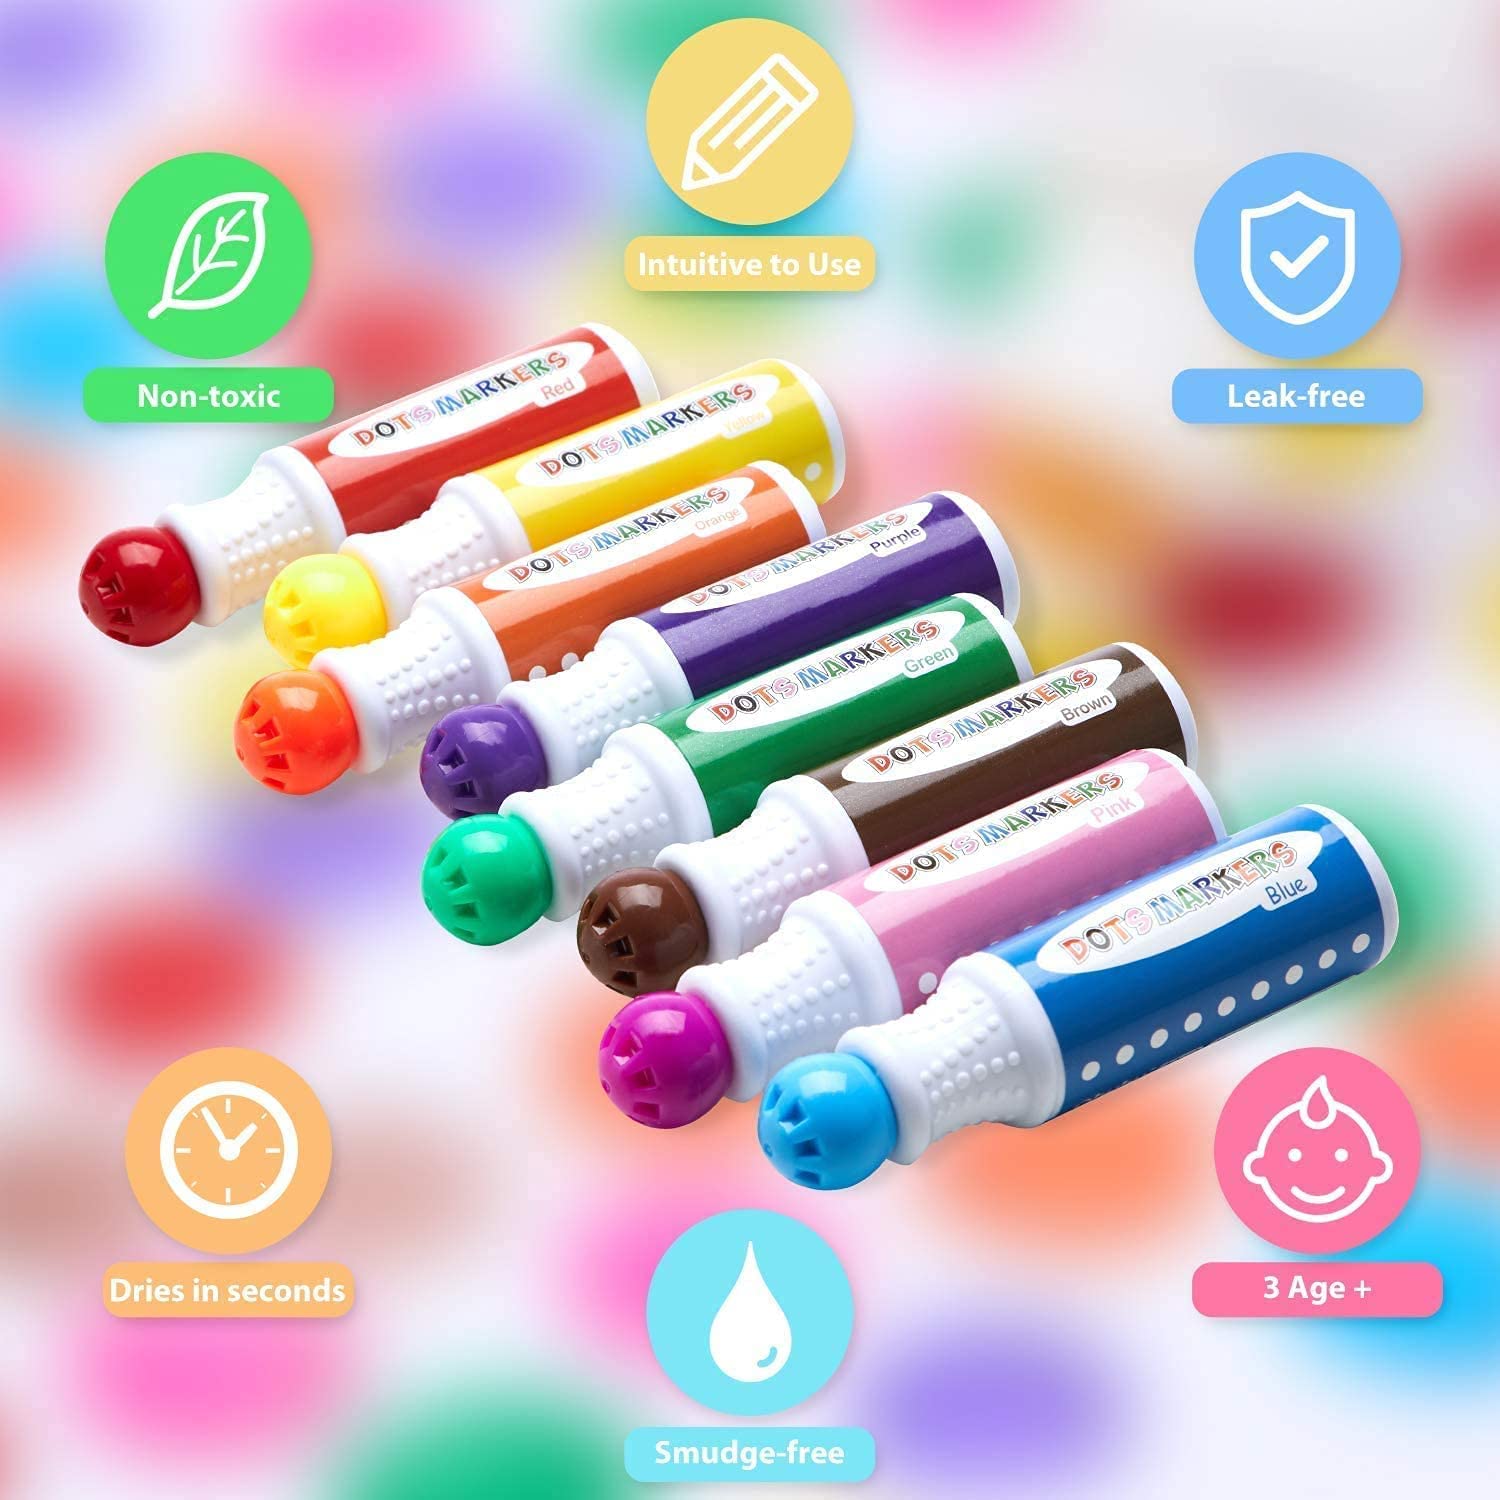 Ohuhu 8 Pack Dots Markers with 30 Page Marker Pad - Great for Kids